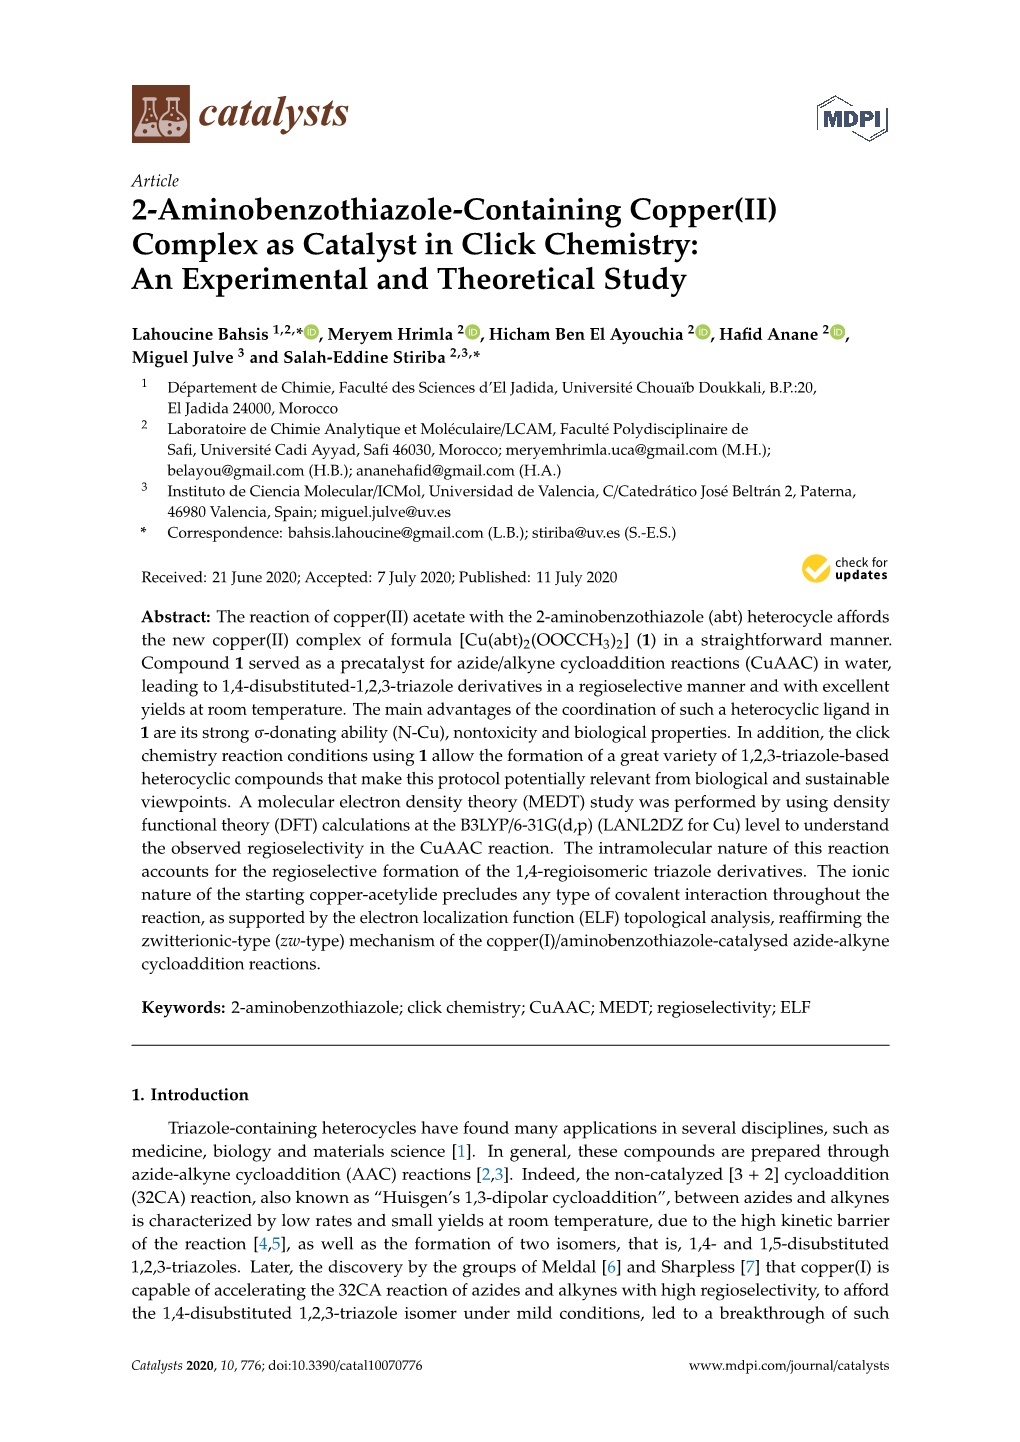 2-Aminobenzothiazole-Containing Copper(II) Complex As Catalyst in Click Chemistry: an Experimental and Theoretical Study